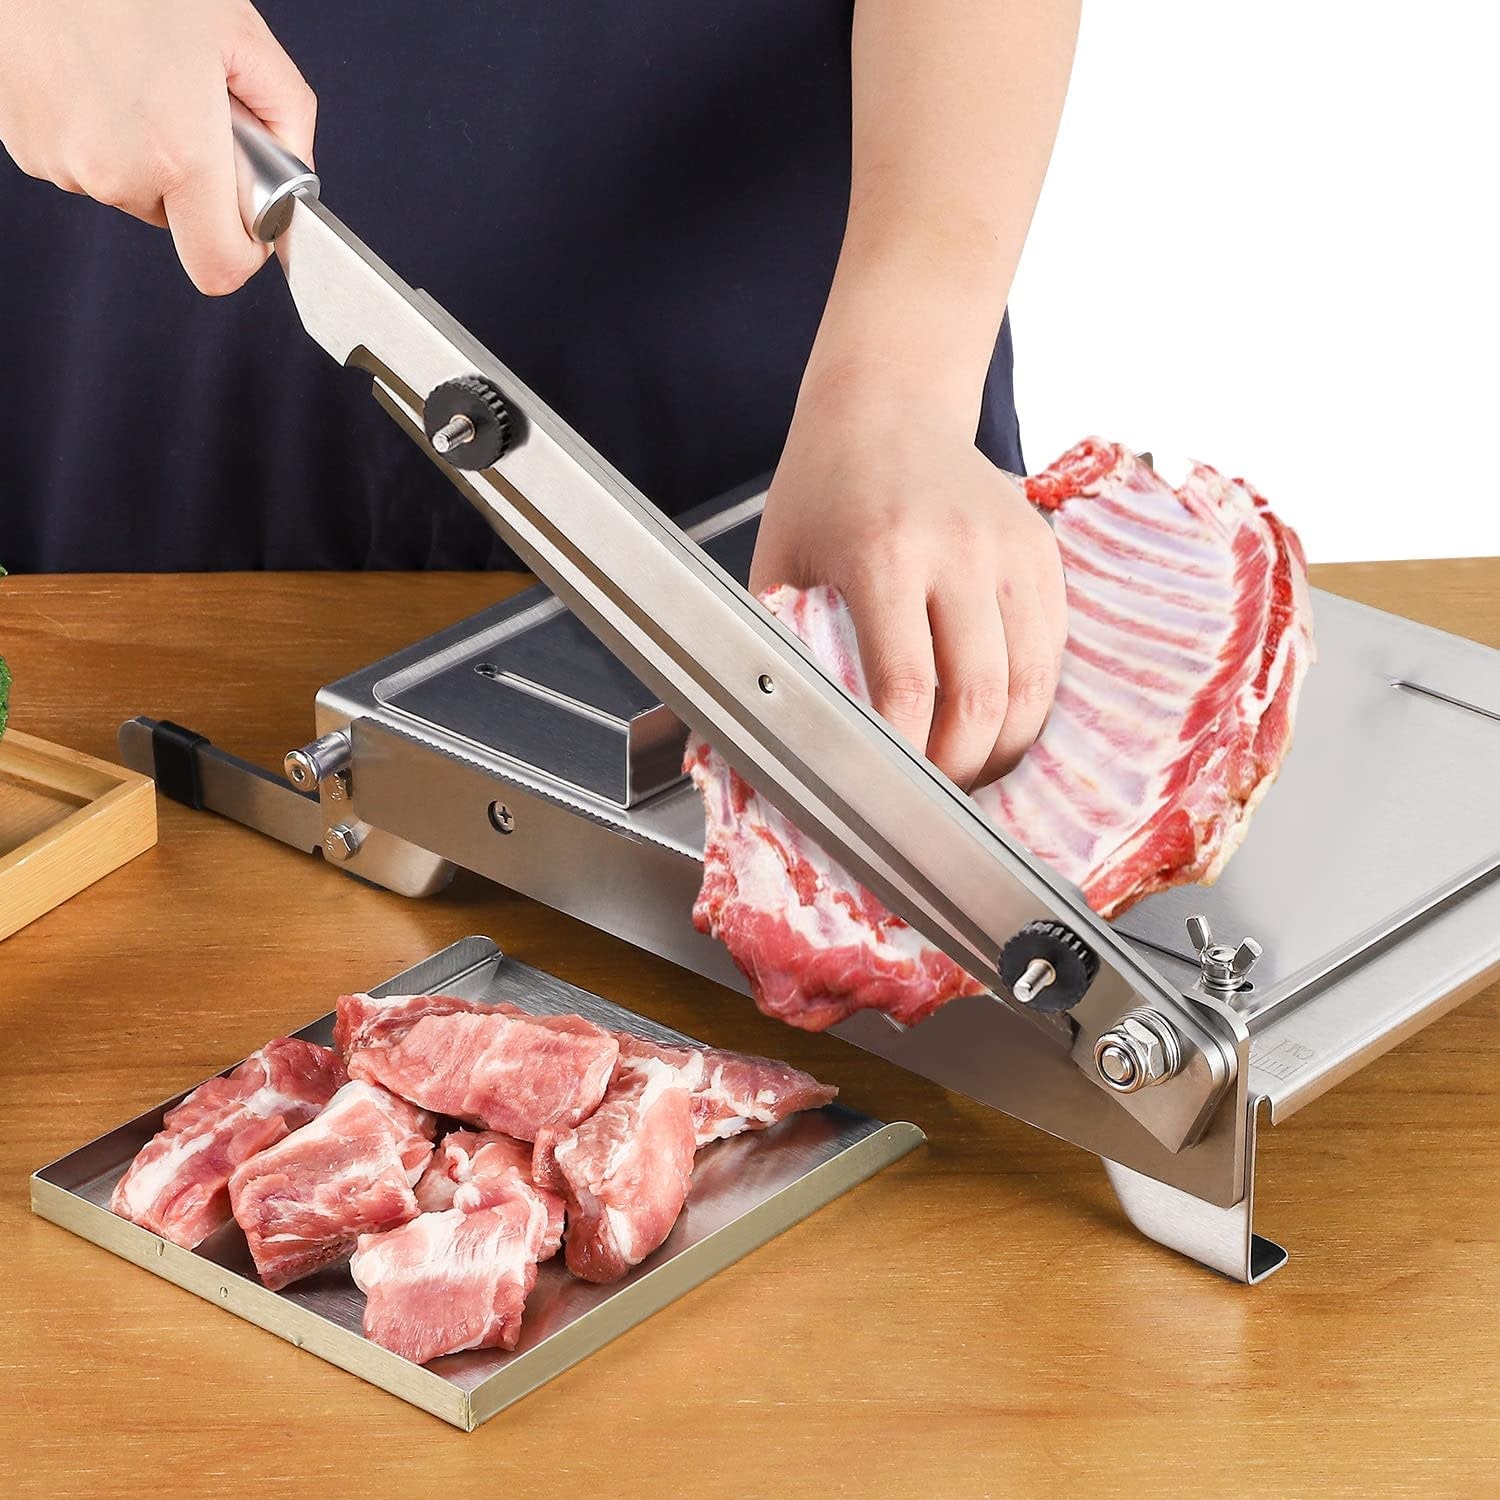 CGOLDENWALL 2 Blades Manual Ribs Meat Chopper Slicer Stainless Steel Hard Bone Cutter Beef Mutton Household Vegetable Food Slicer Slicing Machine